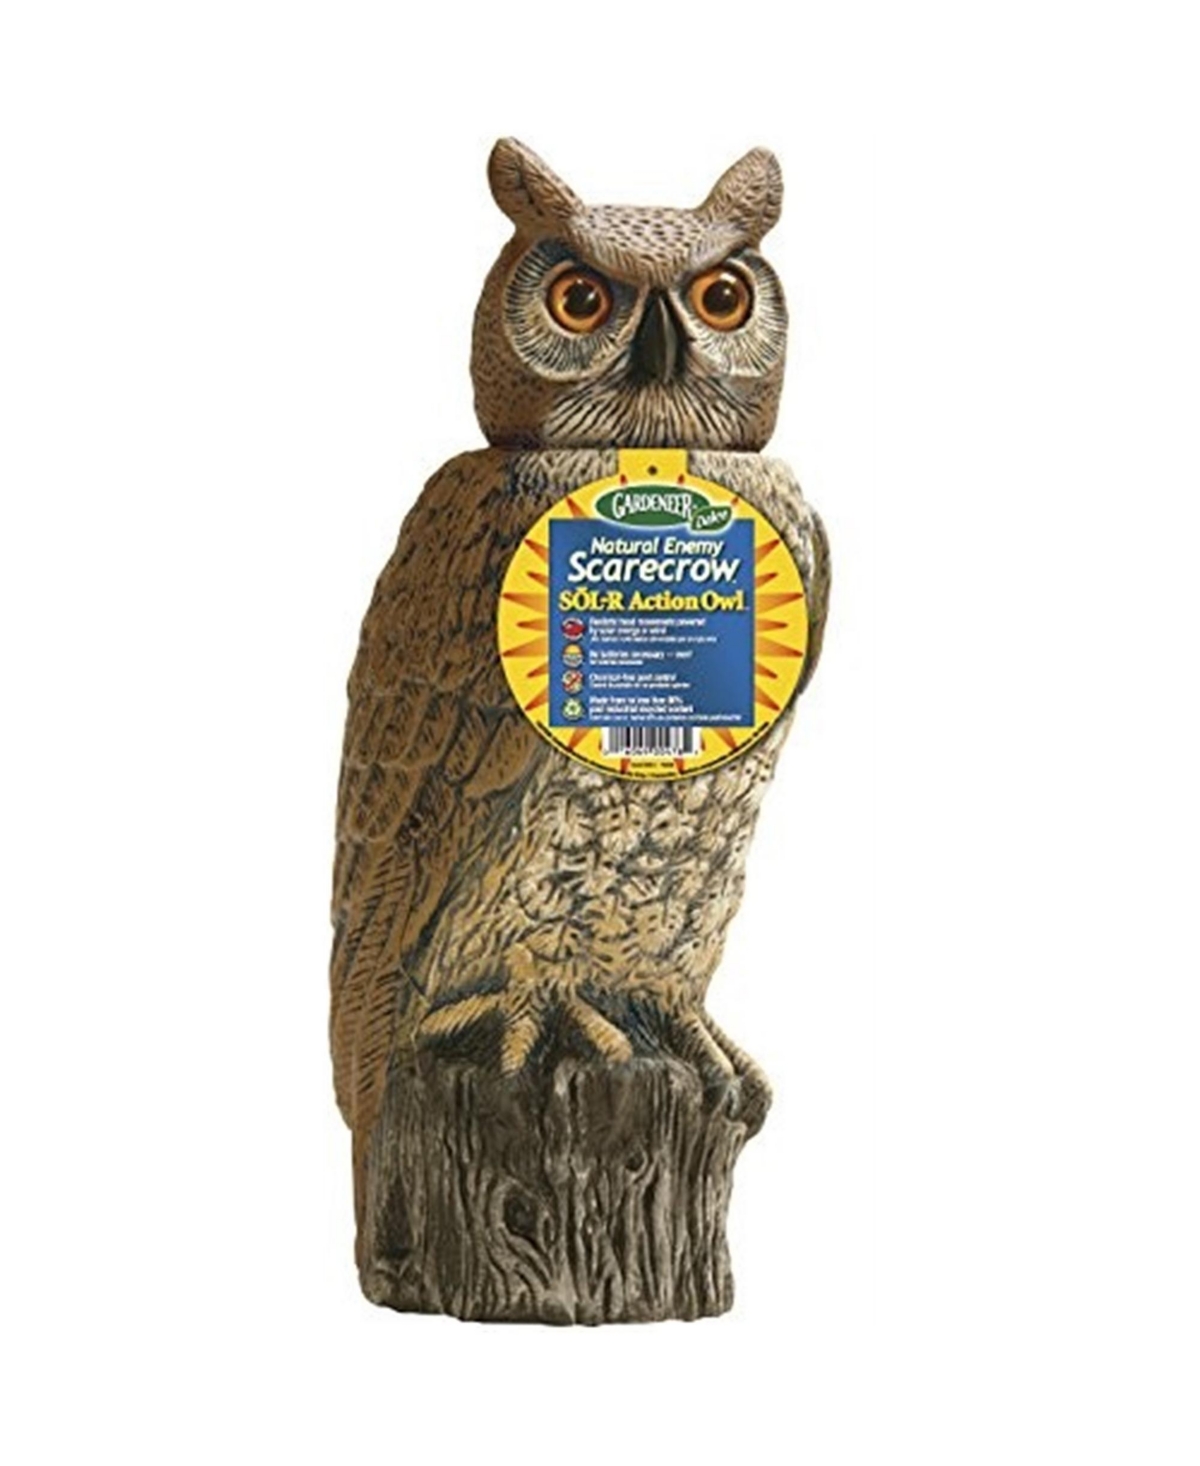 DALSRHO4 Solar Action Owl Natural Scarecrow Device, 18in - Brown